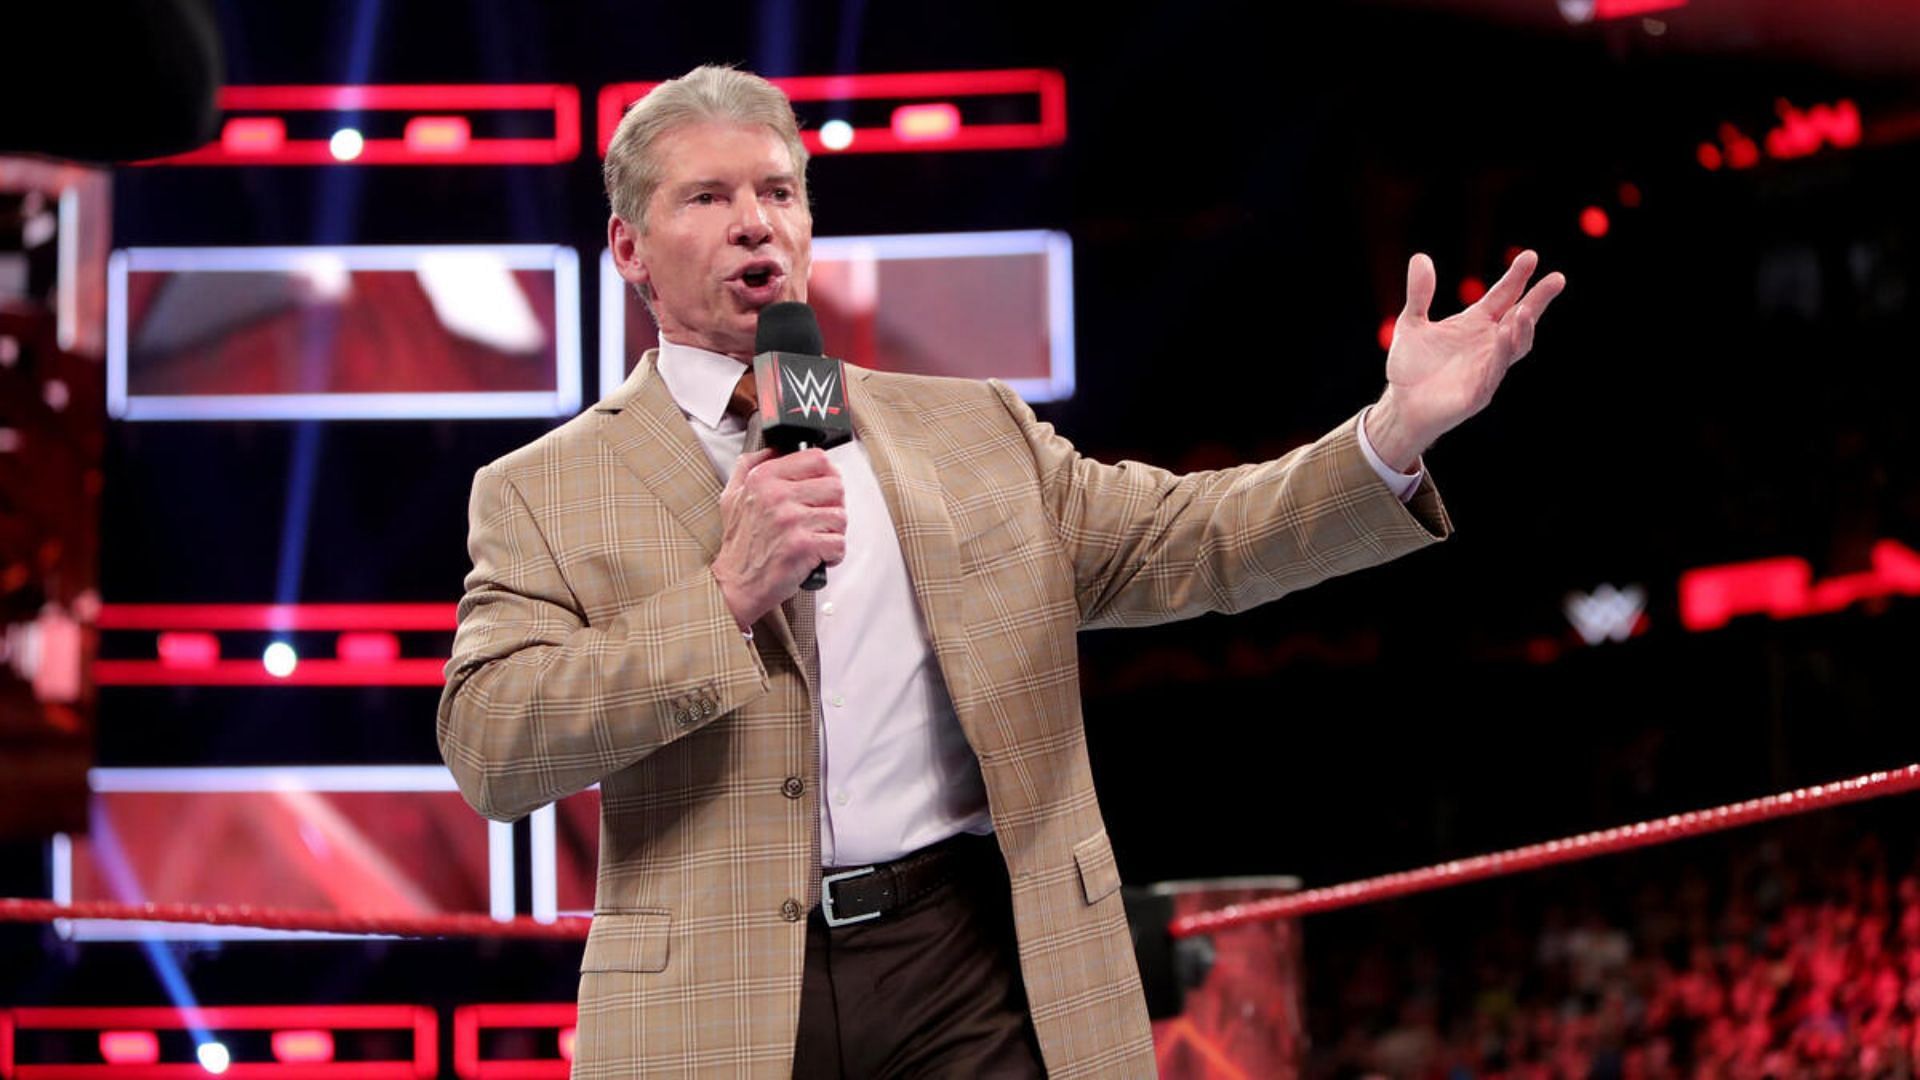 Is Vince McMahon innocent or guilty?